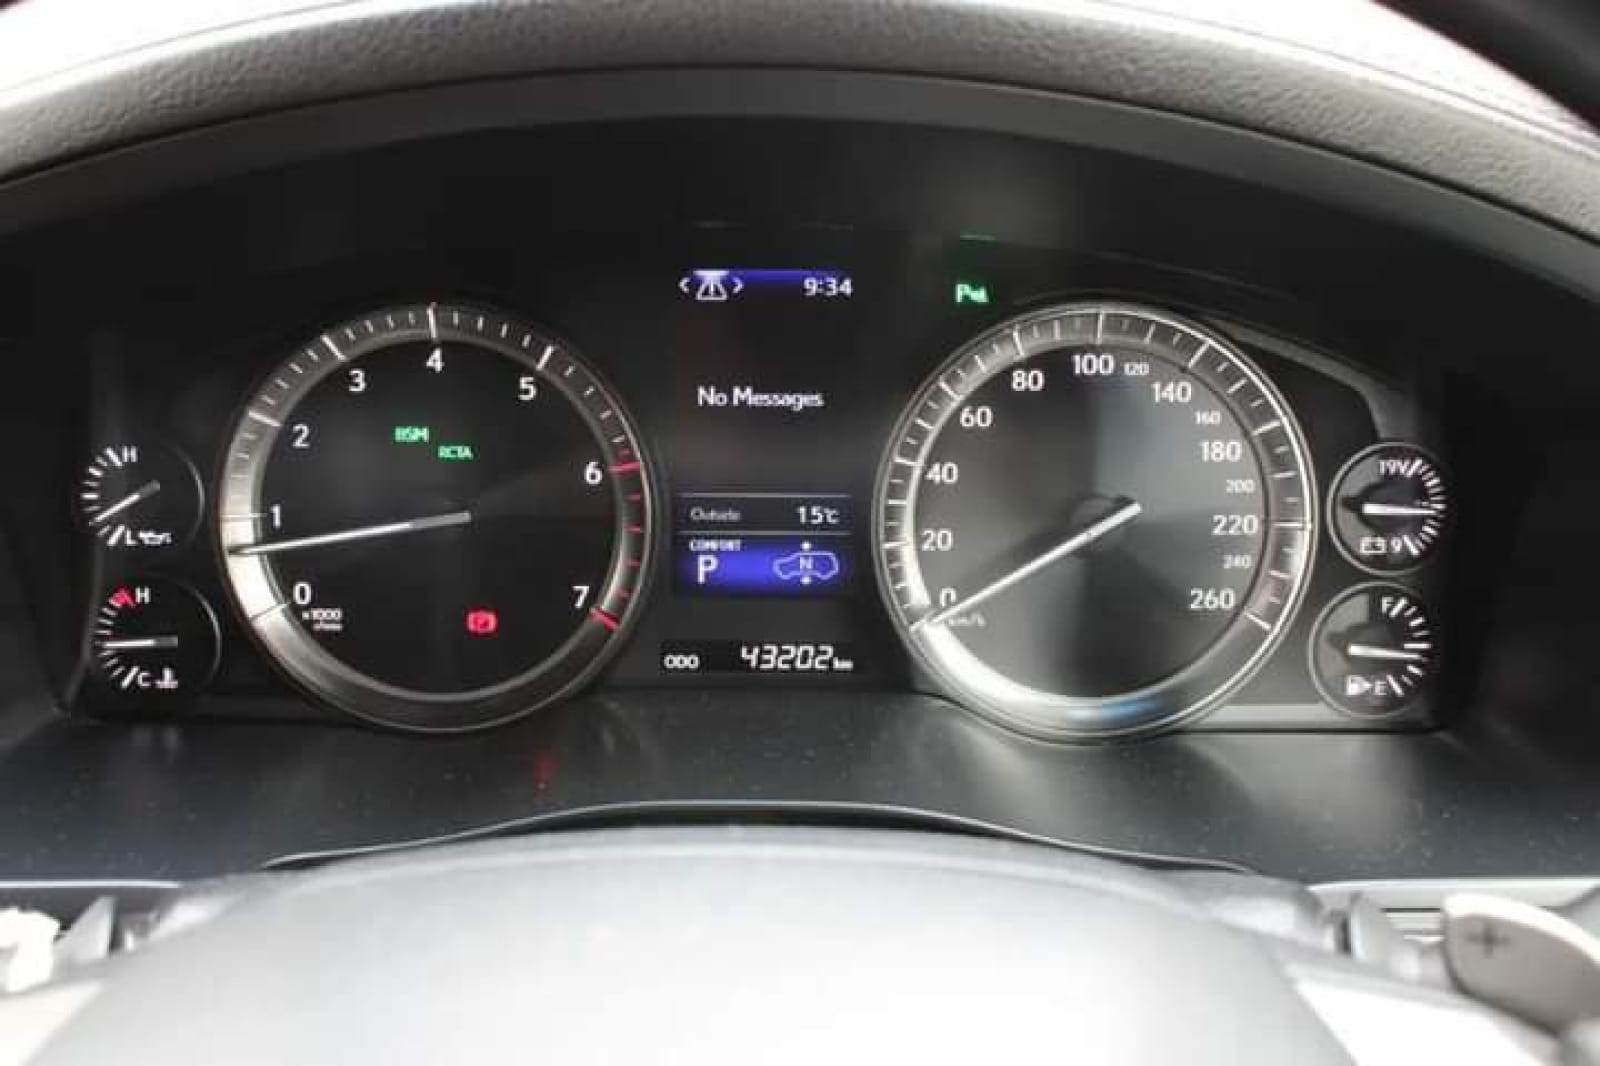 LEXUS LX 570 2019 Fully Loaded HIRE PURCHASE OK EXCLUSIVE For SALE in Kenya